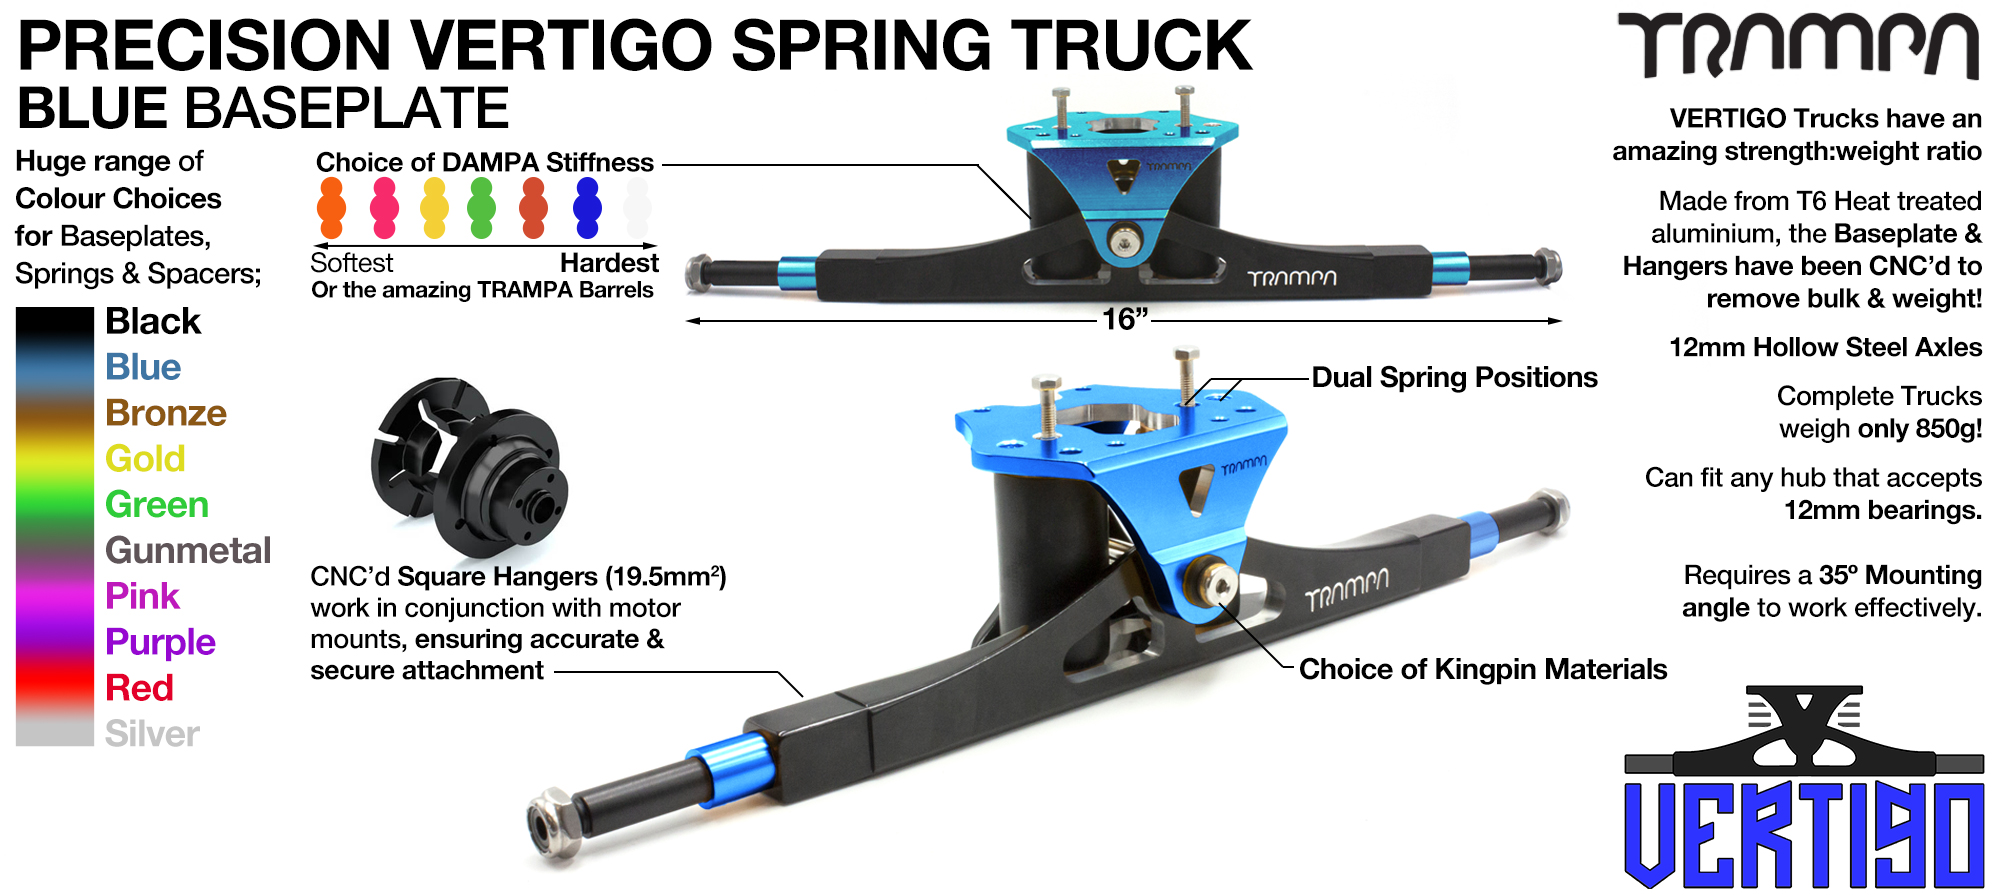 CNC Precision VERTIGO ATB Mountainboard TRUCK - 16.5 Inch Wide with 12mm Hollow Steel Axles Used when fixing Motor Mounts